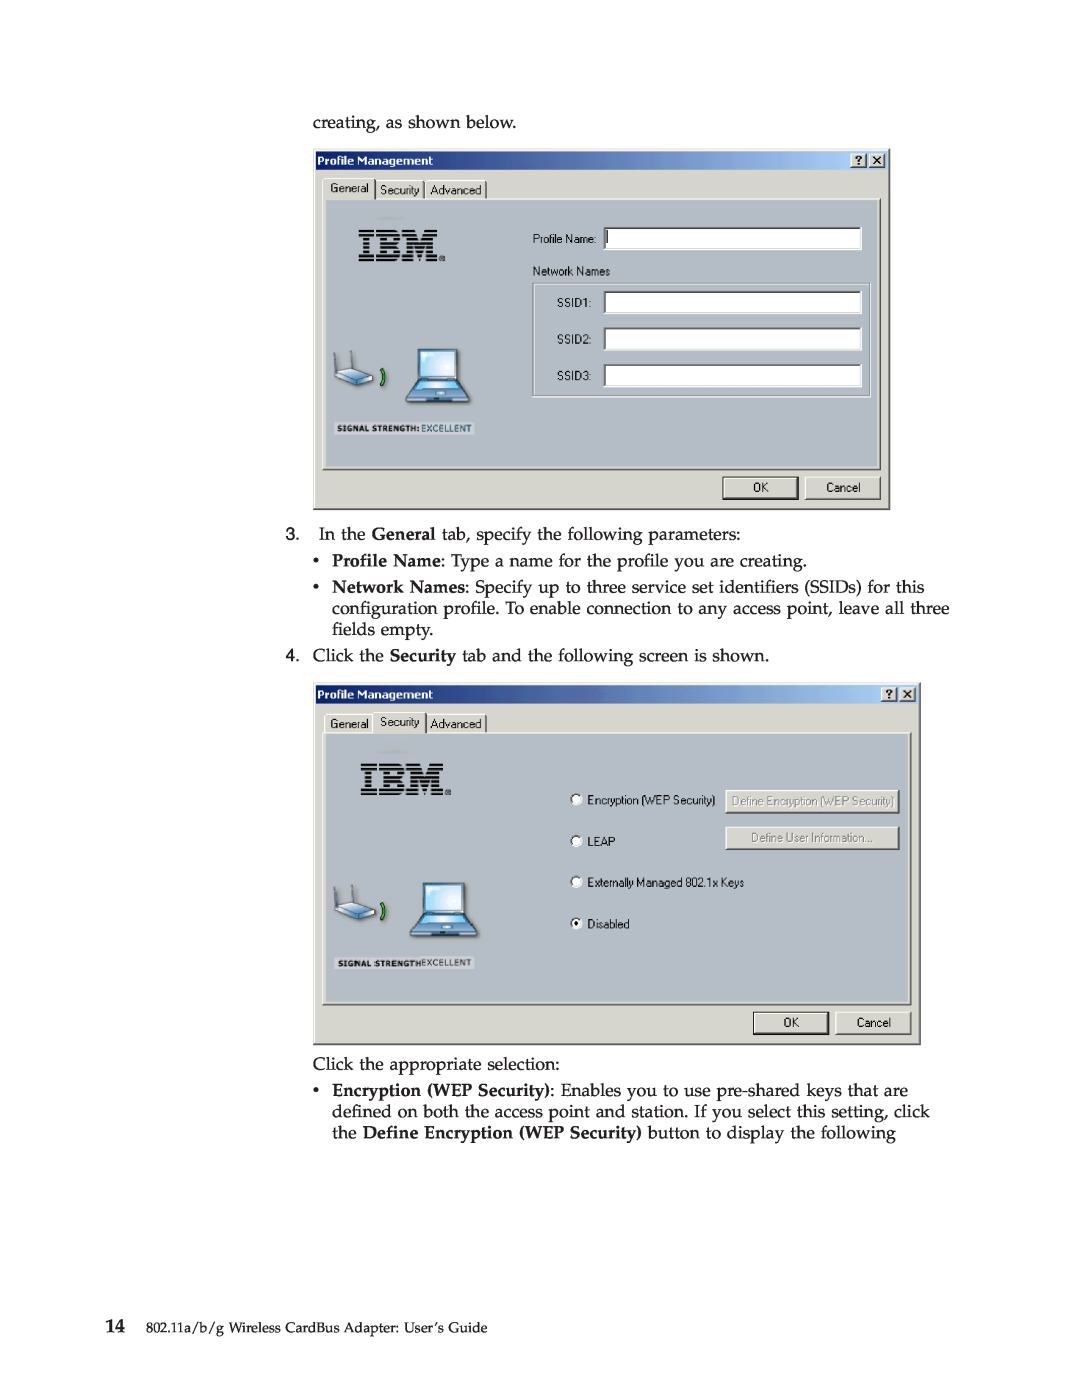 Trust Computer Products IBM 802.11a/b/g Wireless CardBus Adapter manual creating, as shown below 